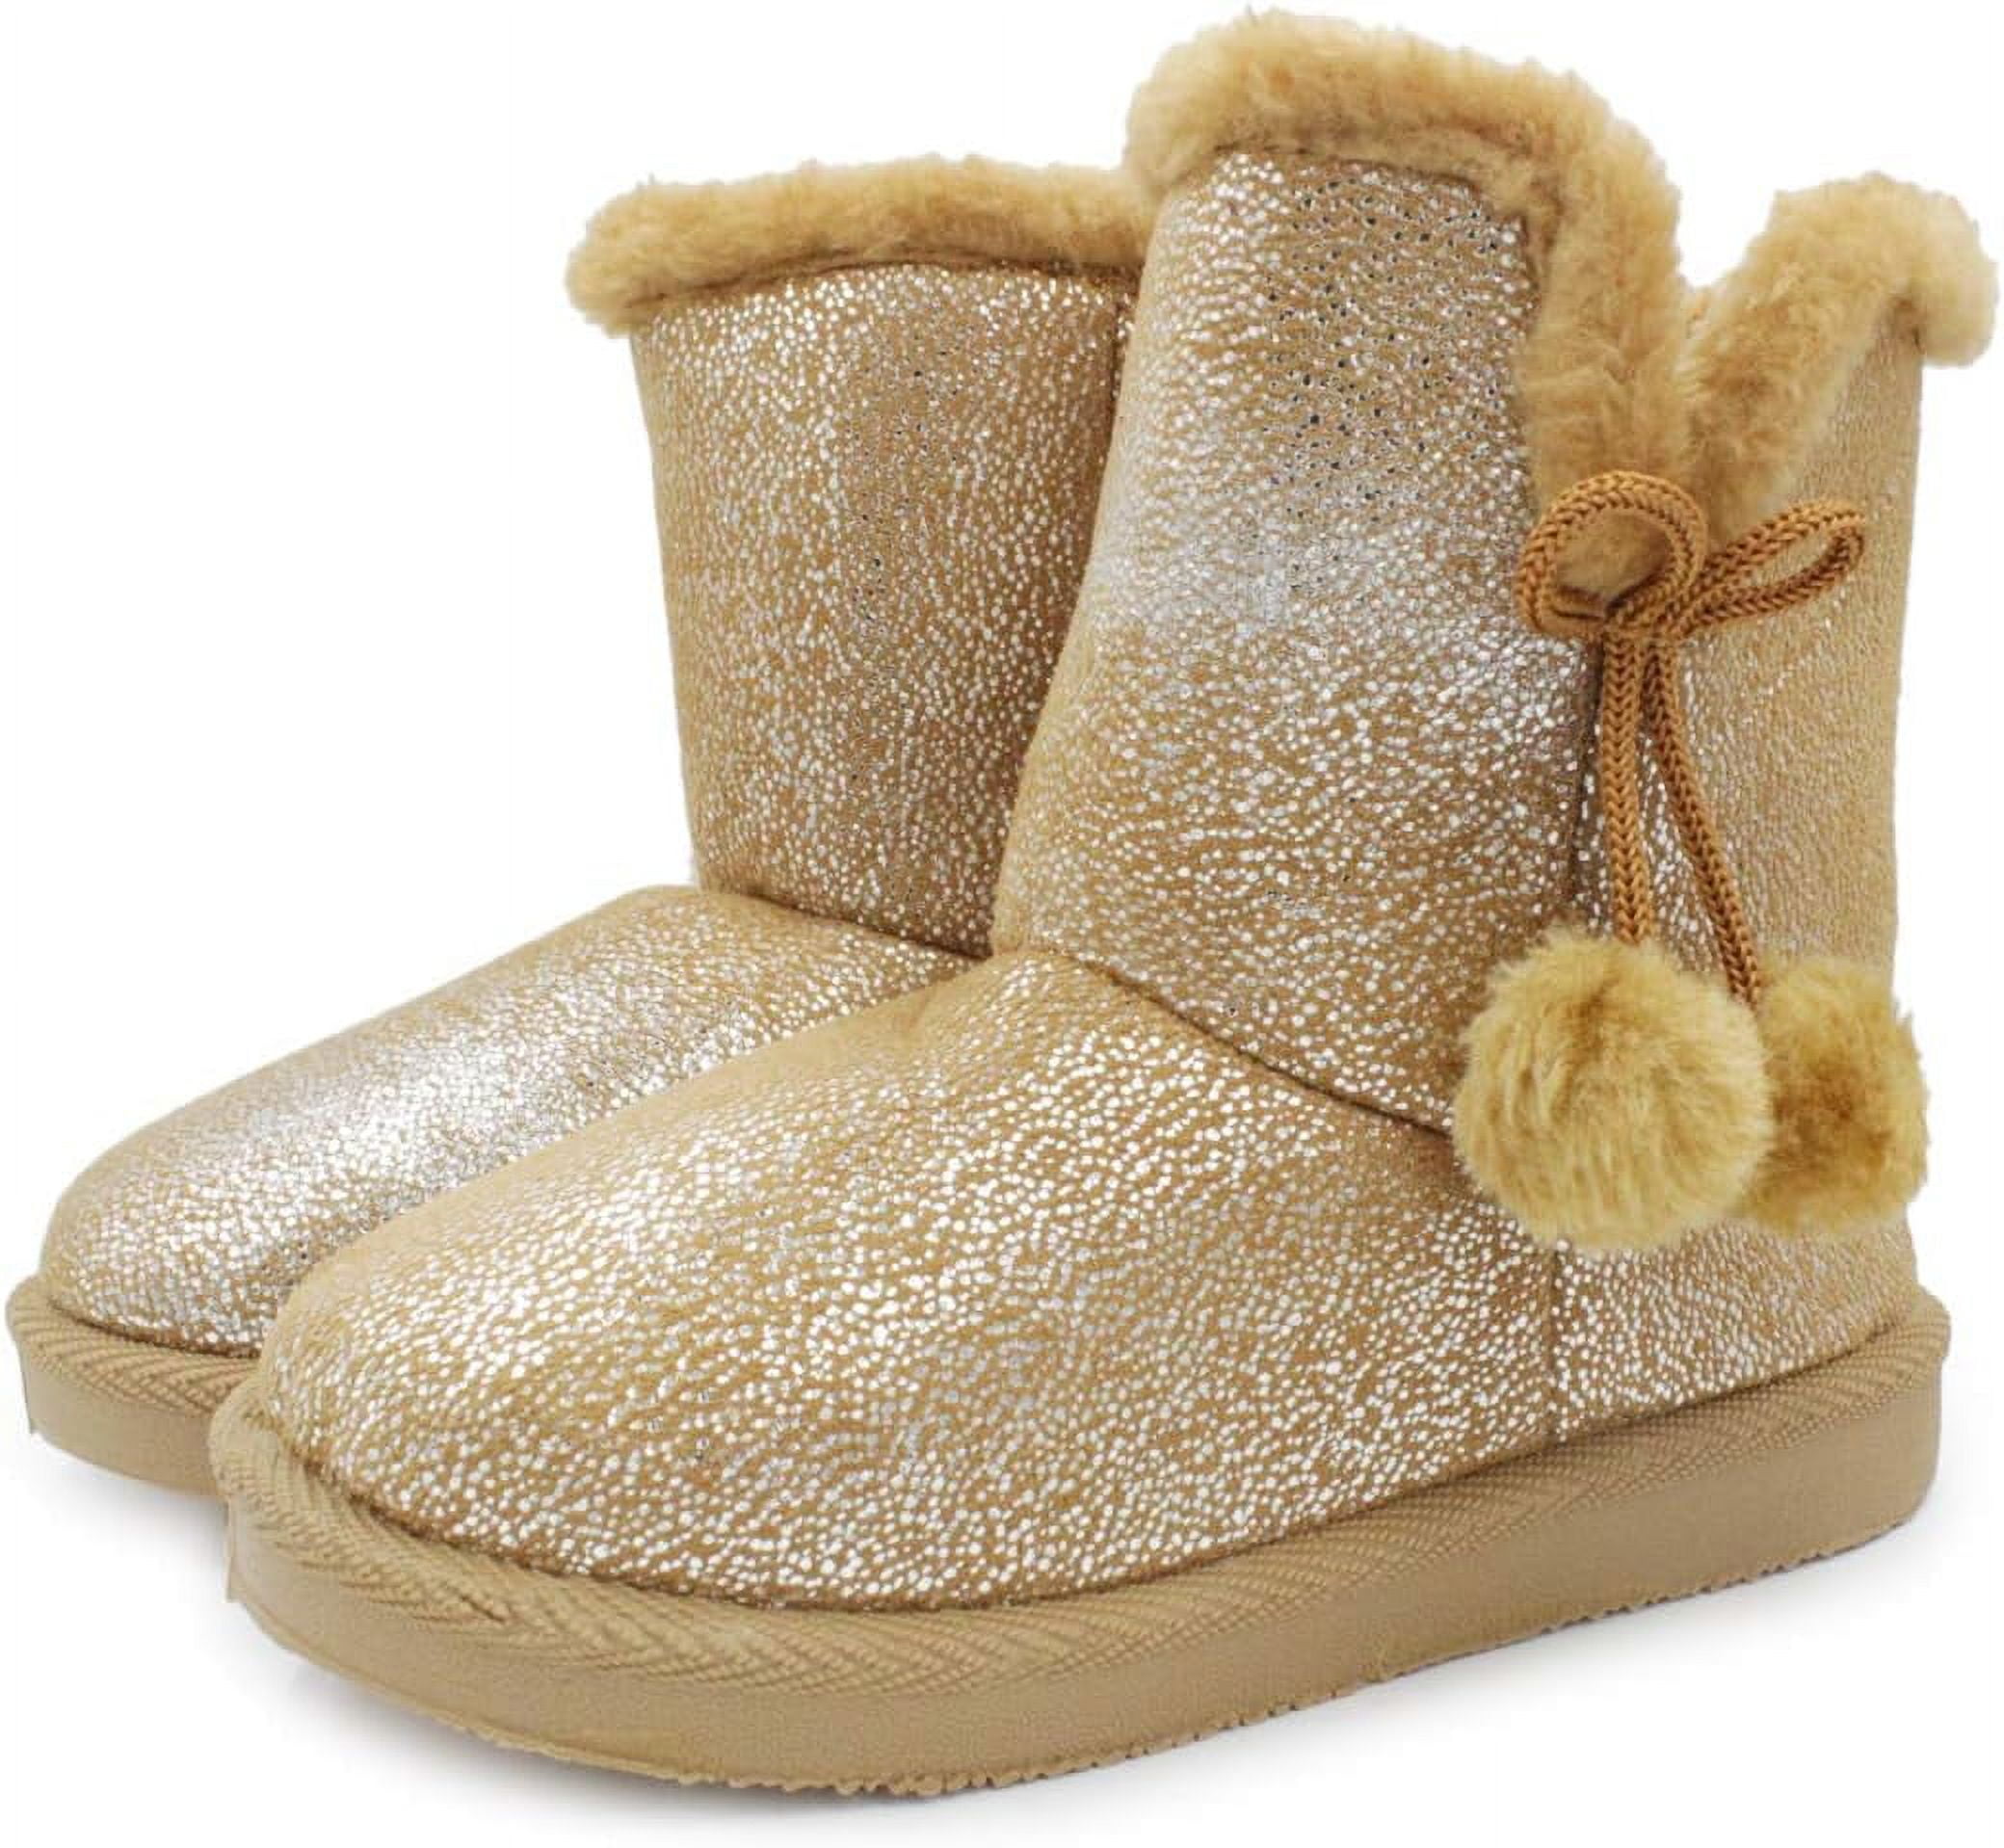 LAVRA Toddler Snow Boots for Girls Cute Faux Suede Calf Knit Girl ...